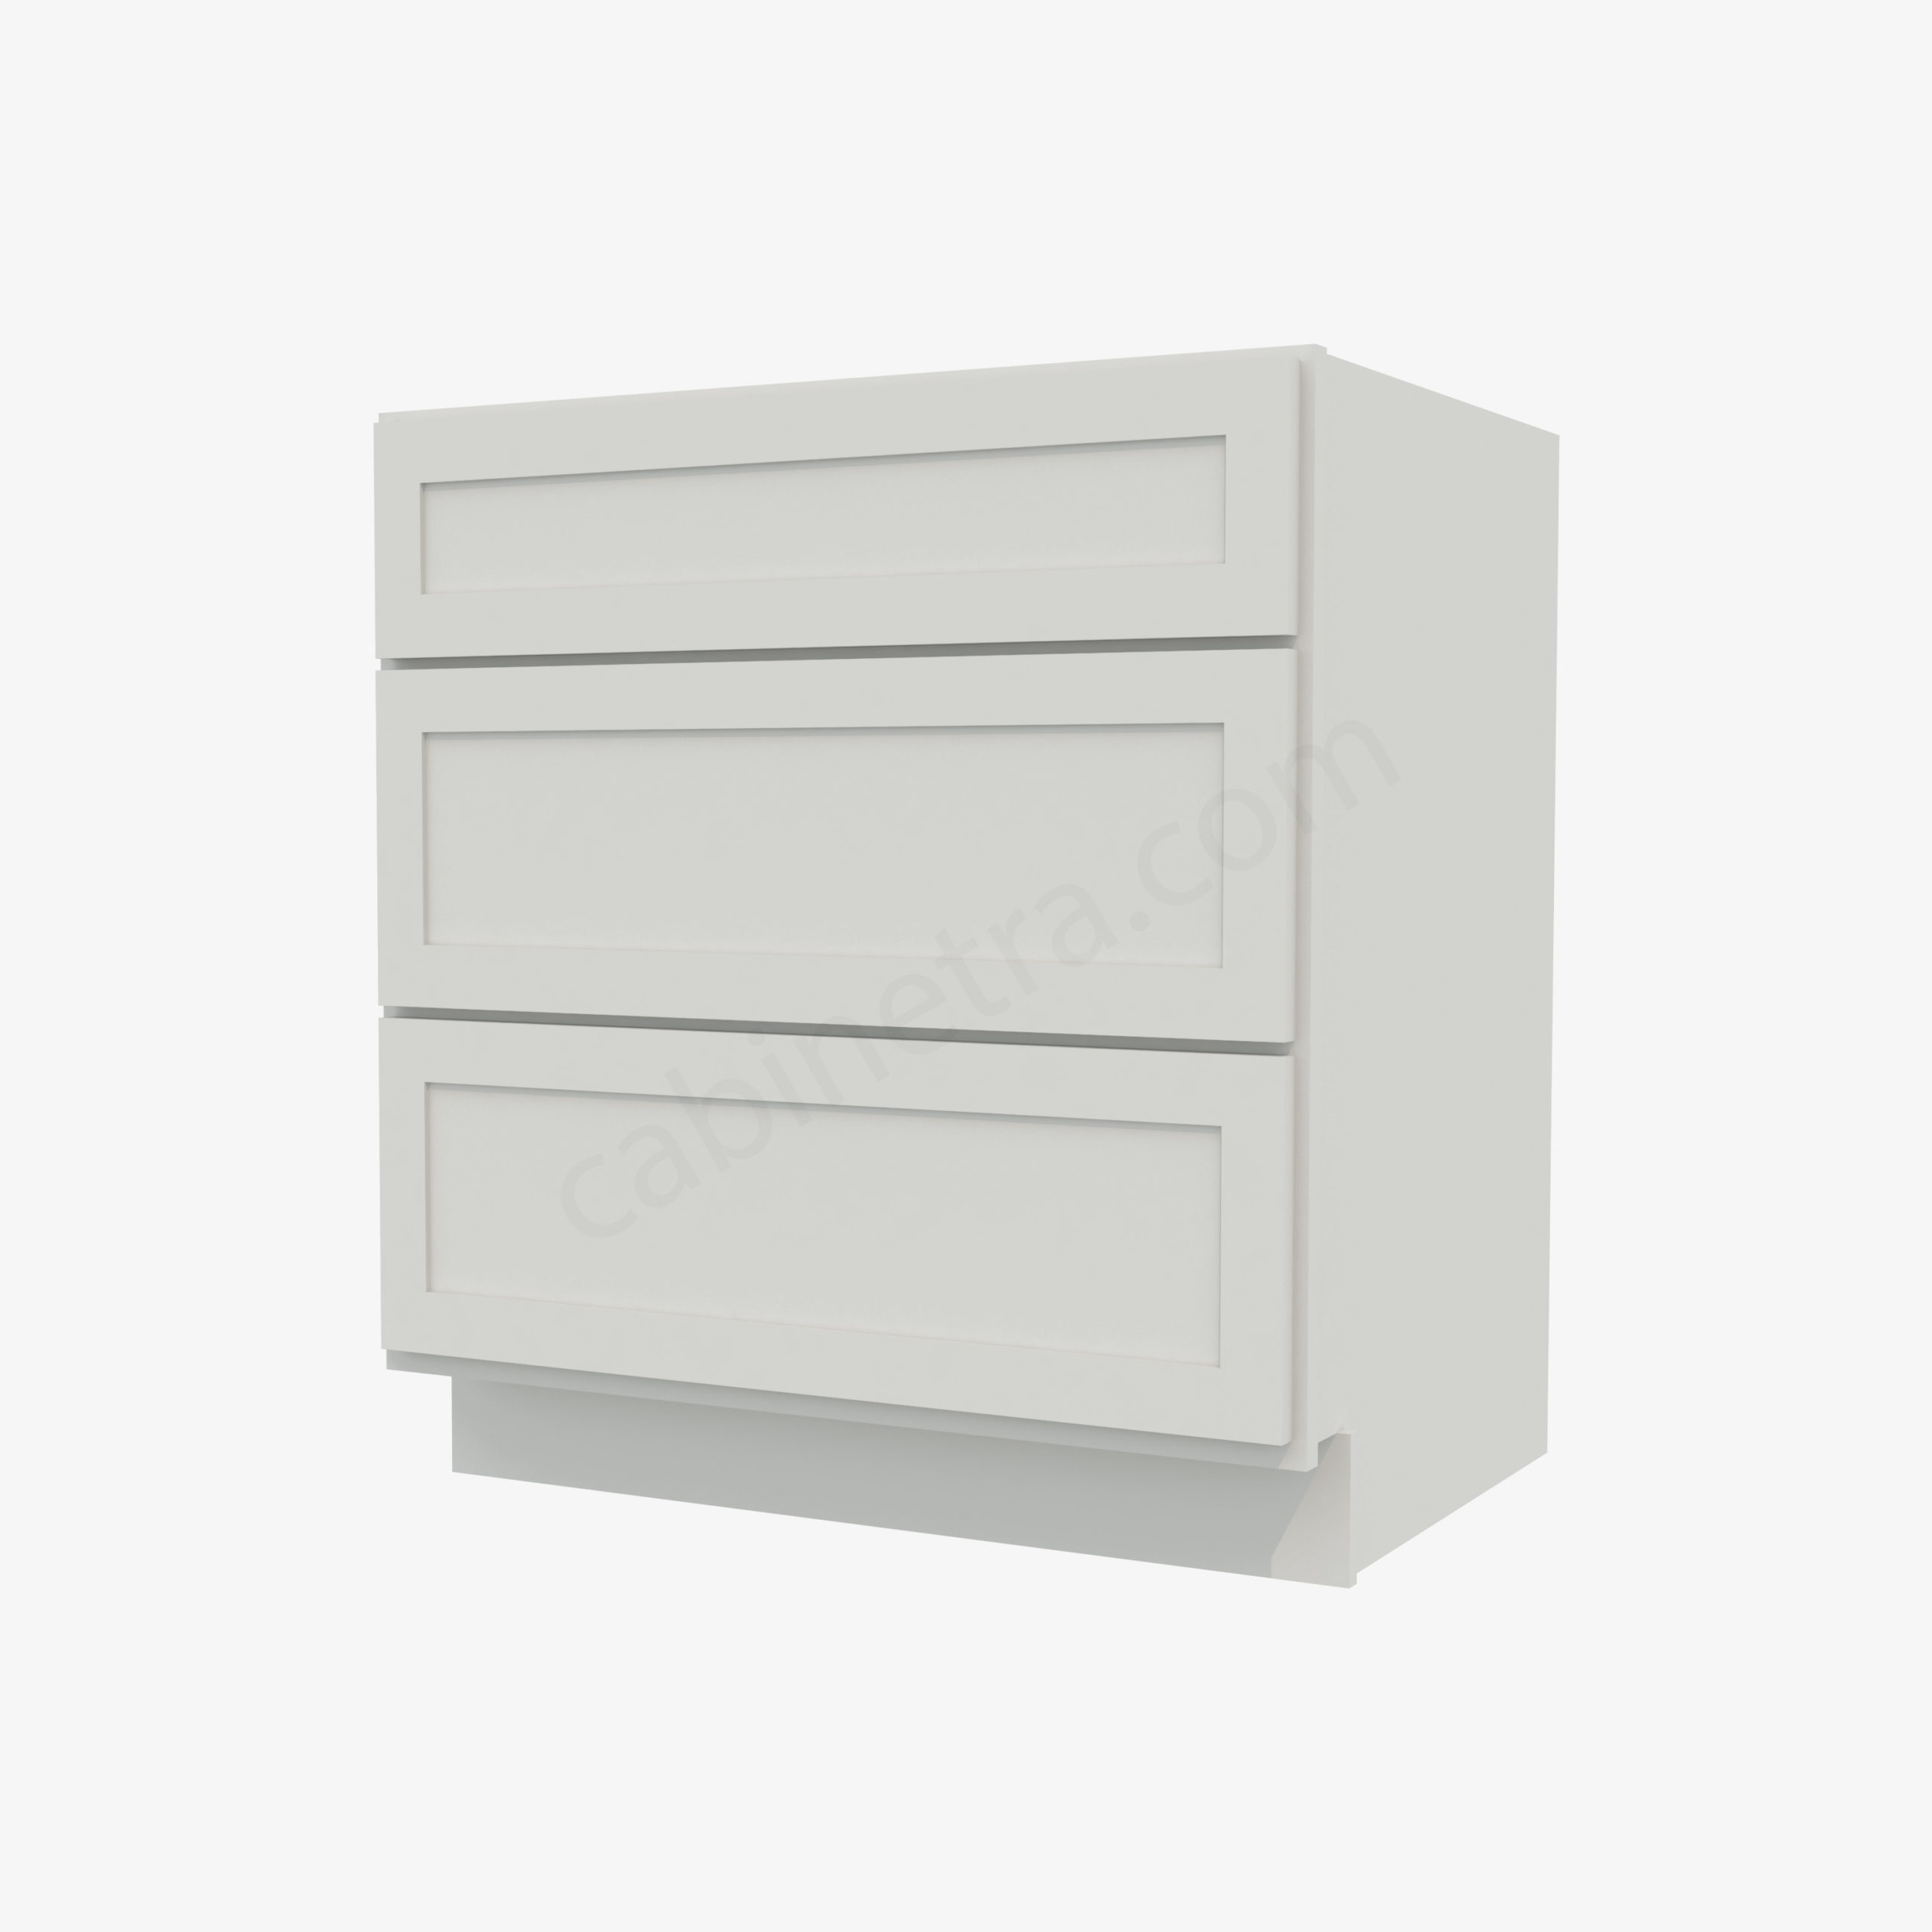 https://cabinetra.com/wp-content/uploads/2020/09/AW-DB30-0_Forevermark_Ice_White_Shaker-Cabinetra-scaled.jpg